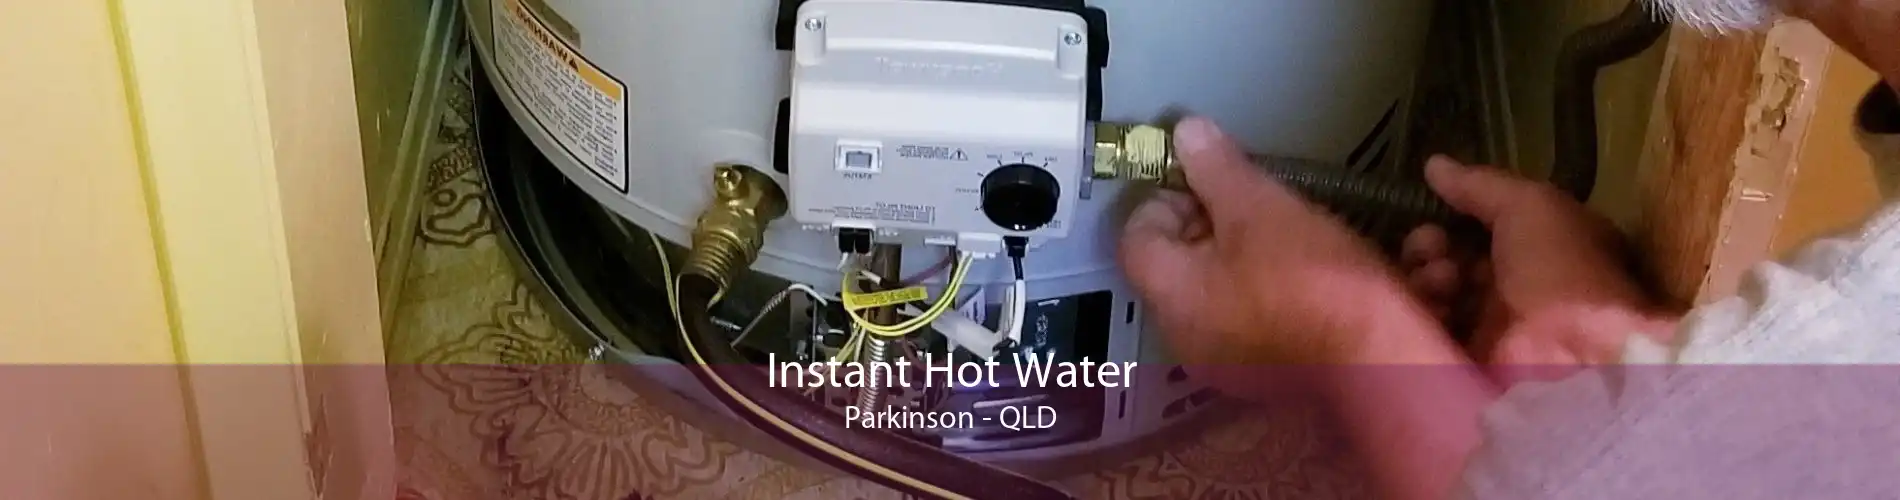 Instant Hot Water Parkinson - QLD